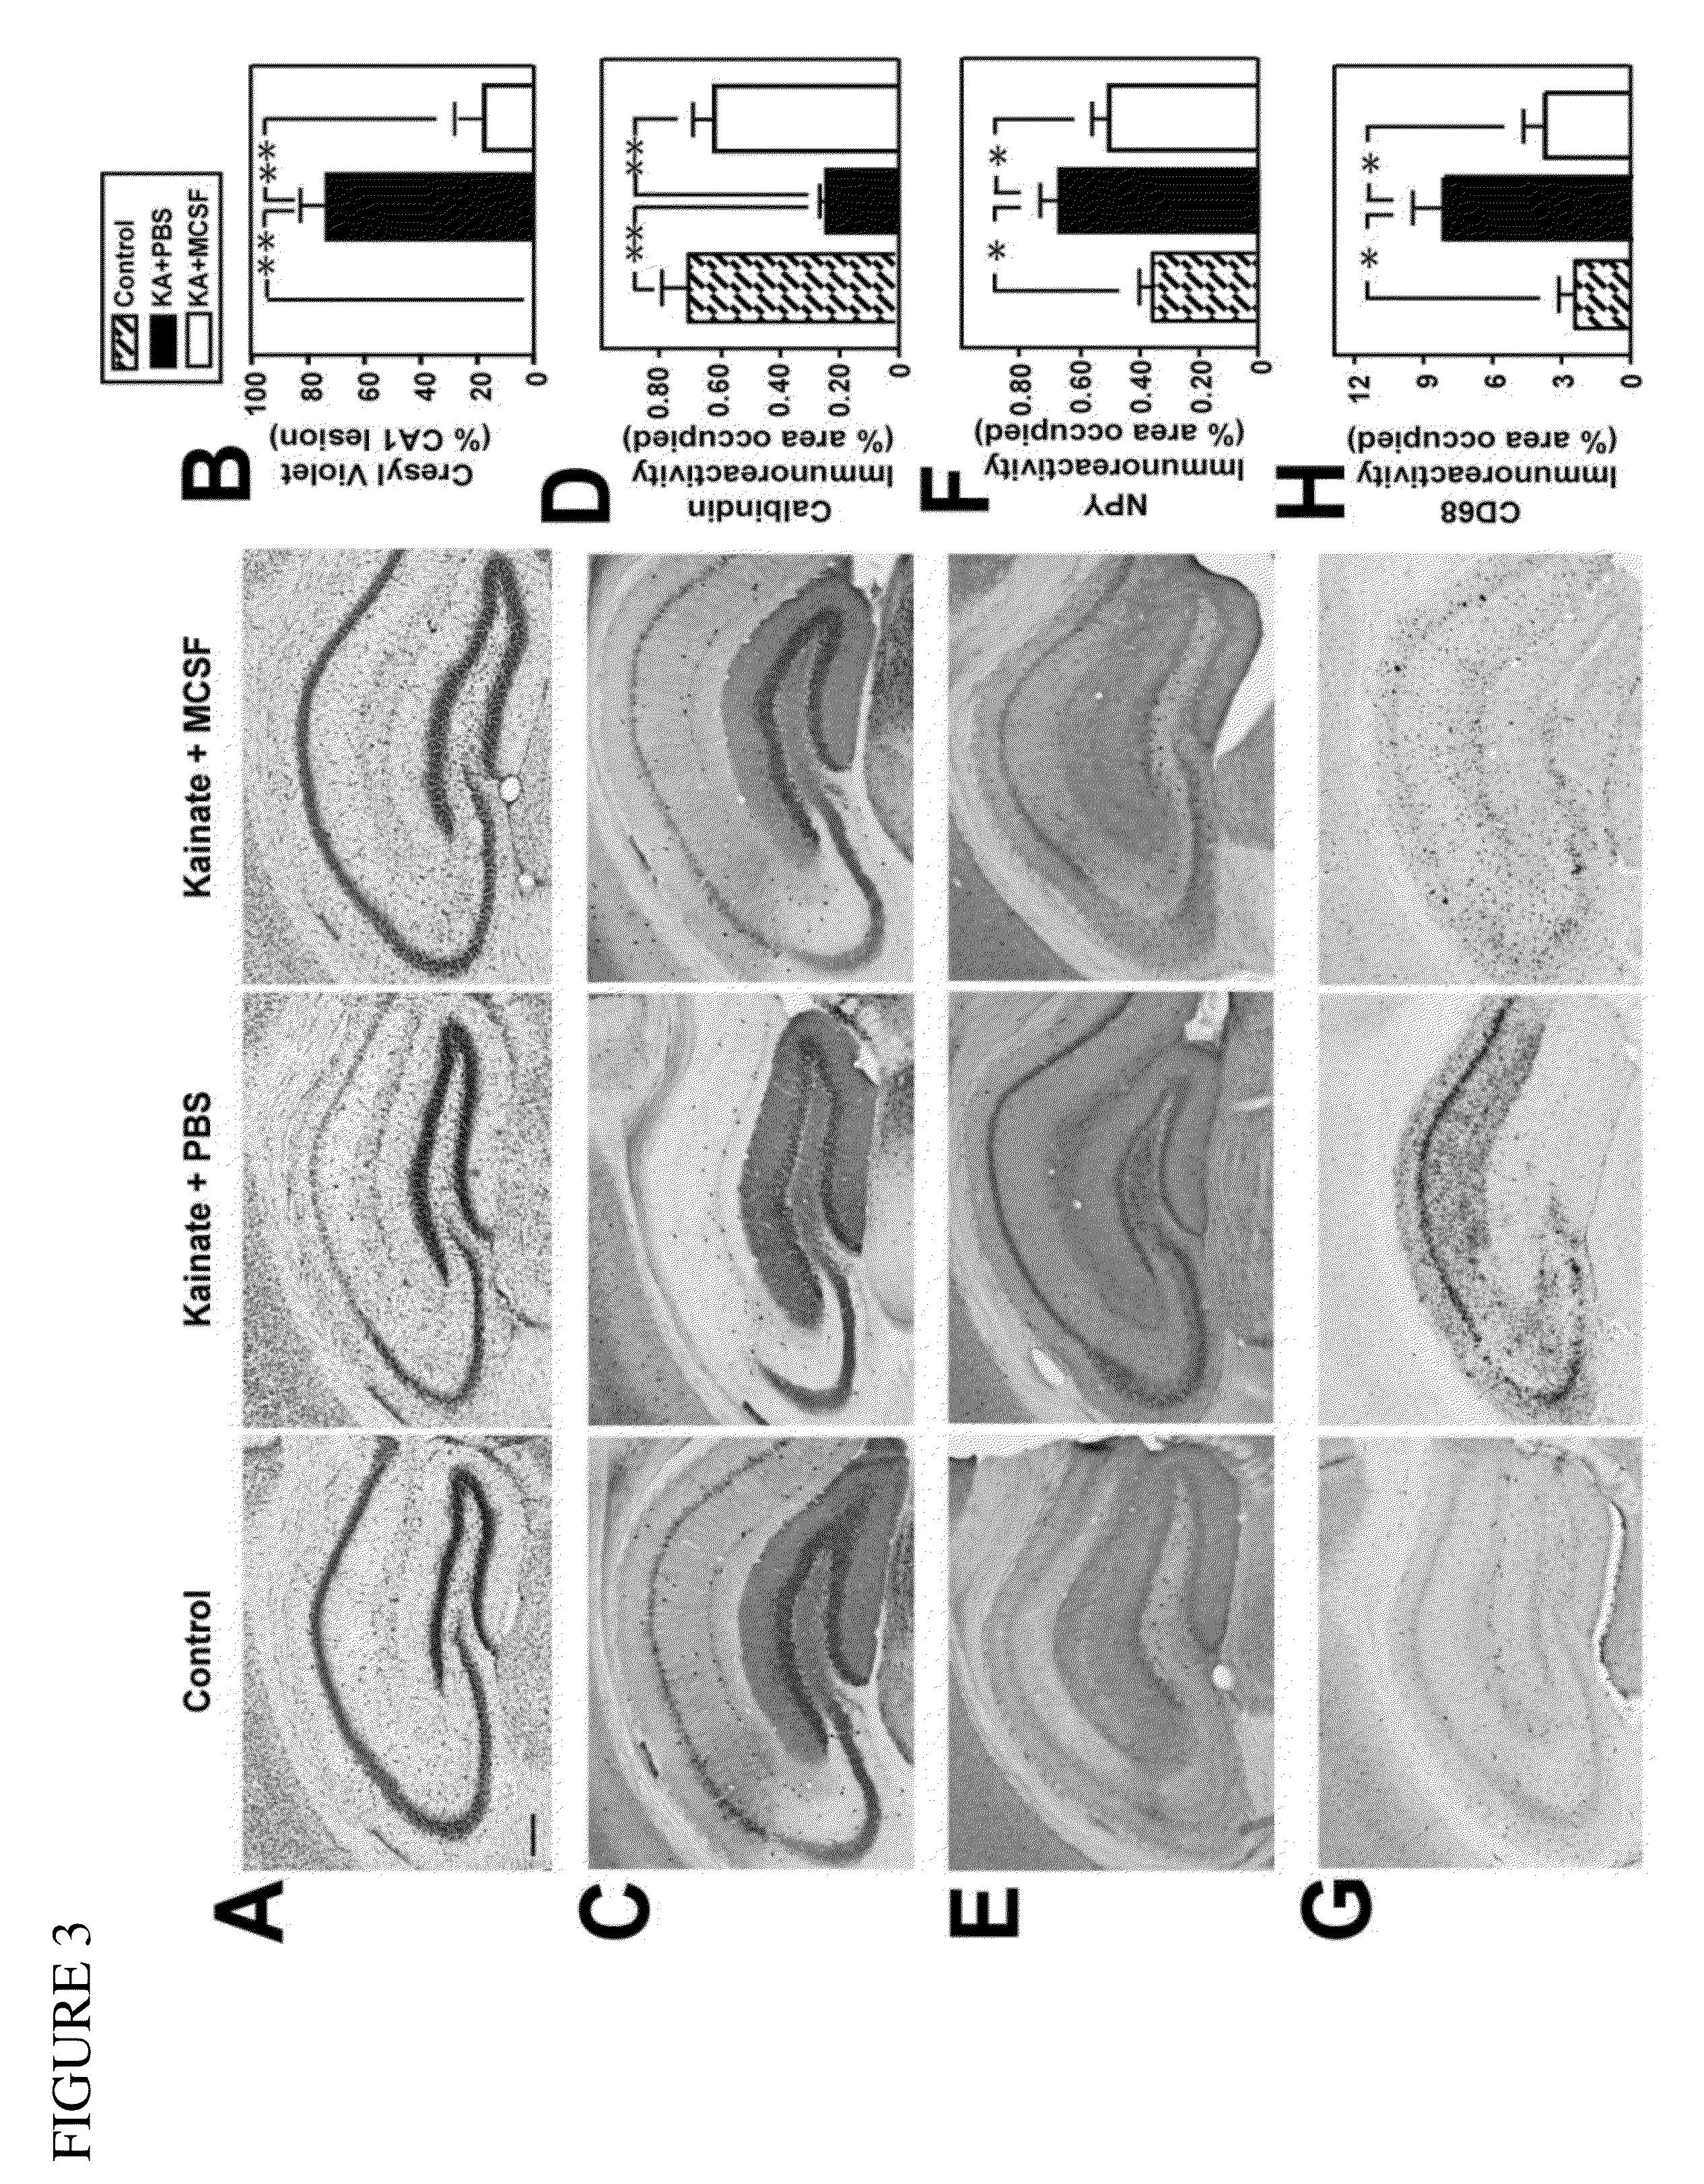 Methods of neuroprotection involving macrophage colony stimulating factor receptor agonists